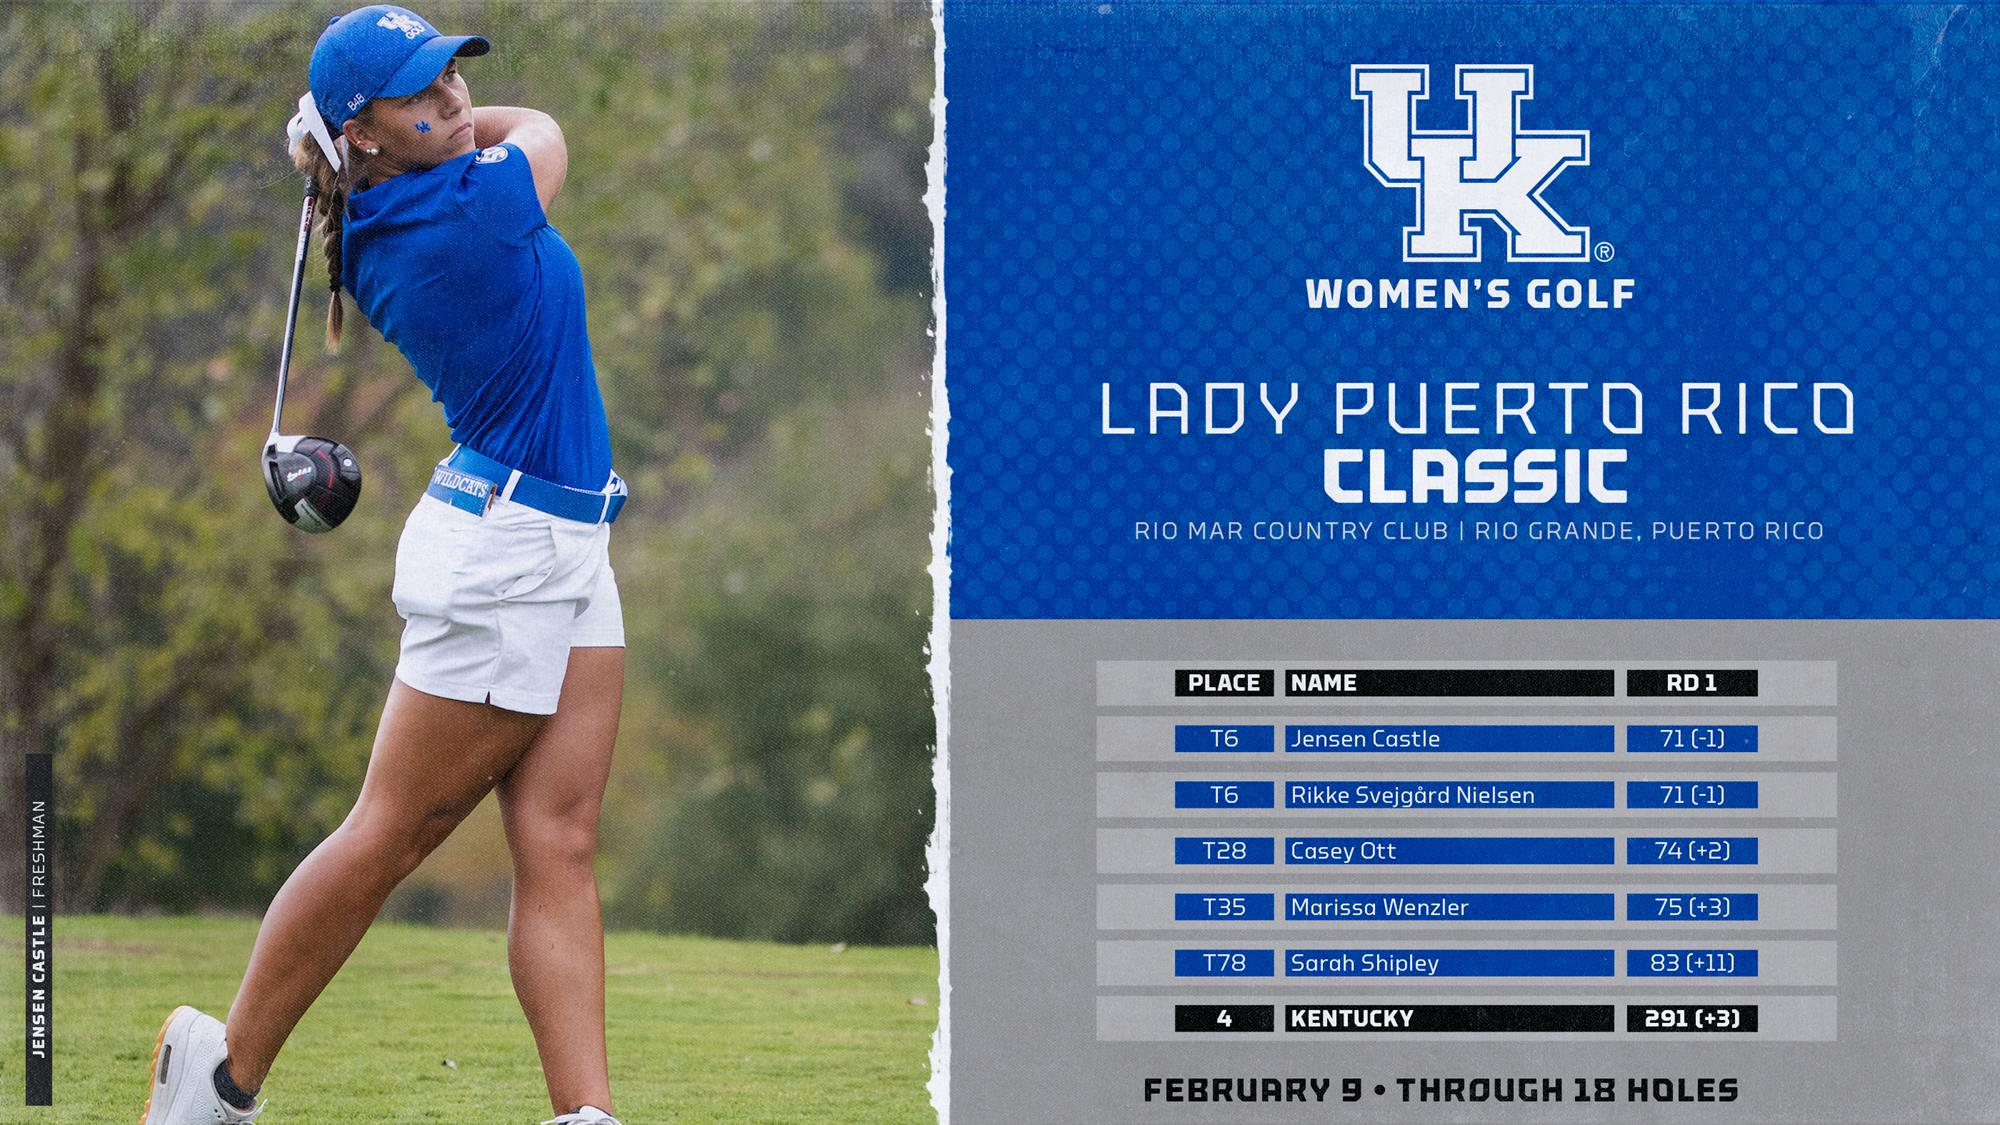 Wildcats Open Spring in Strong Fashion at Lady Puerto Rico Classic